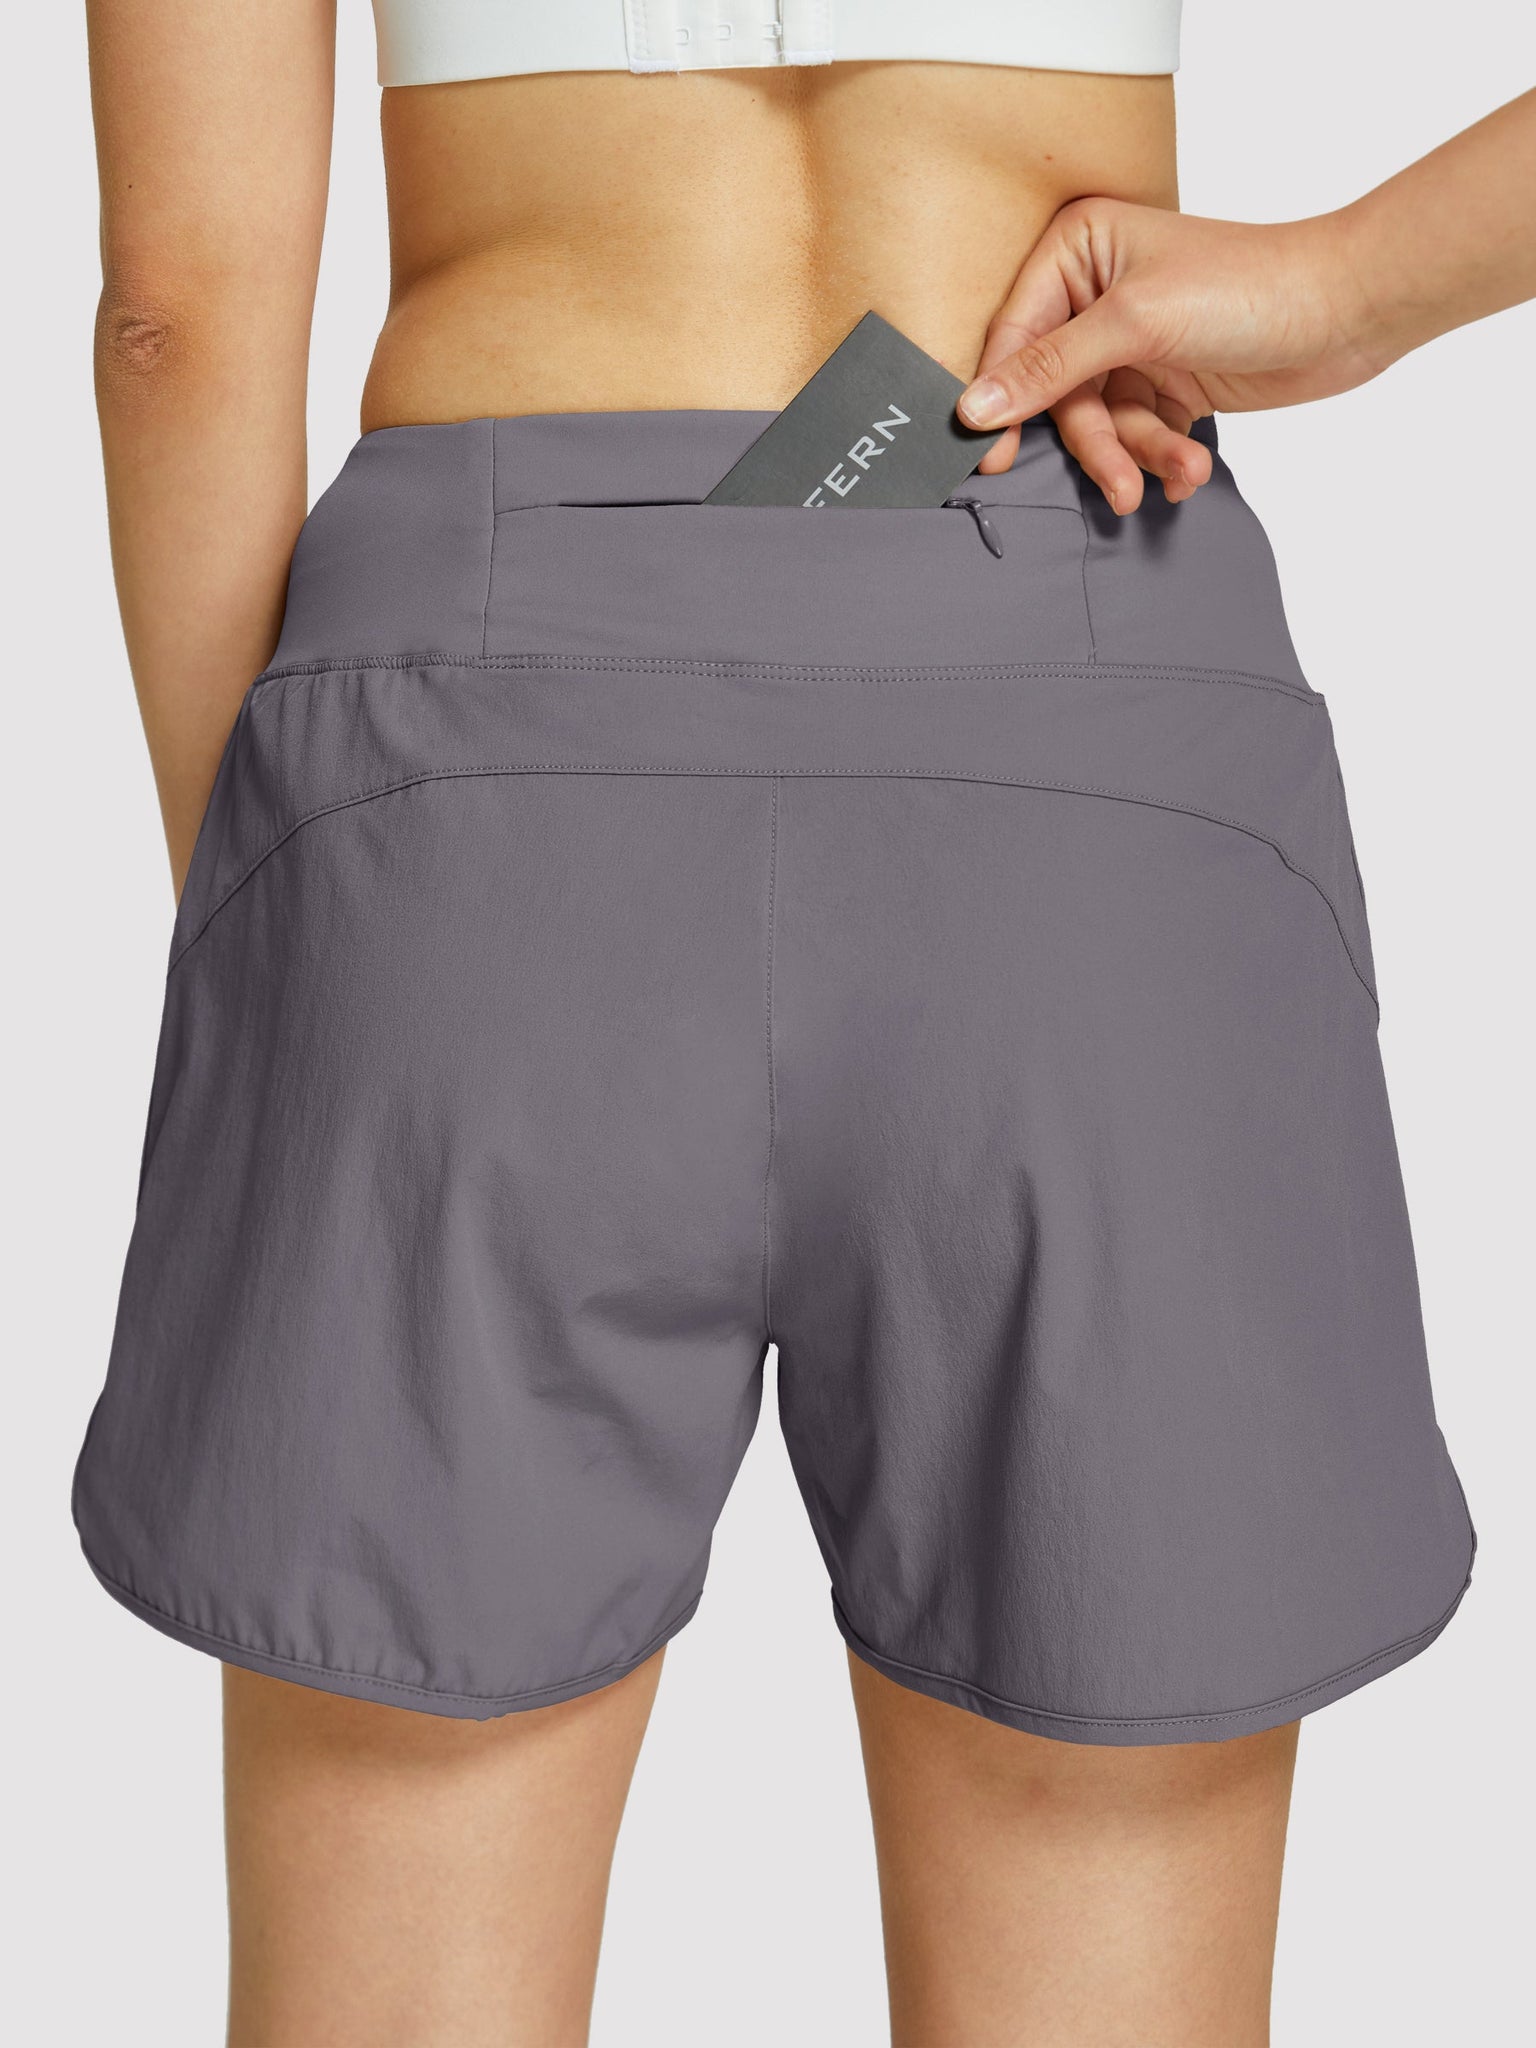 Womens High Rise Running Athletic Shorts_Gray3